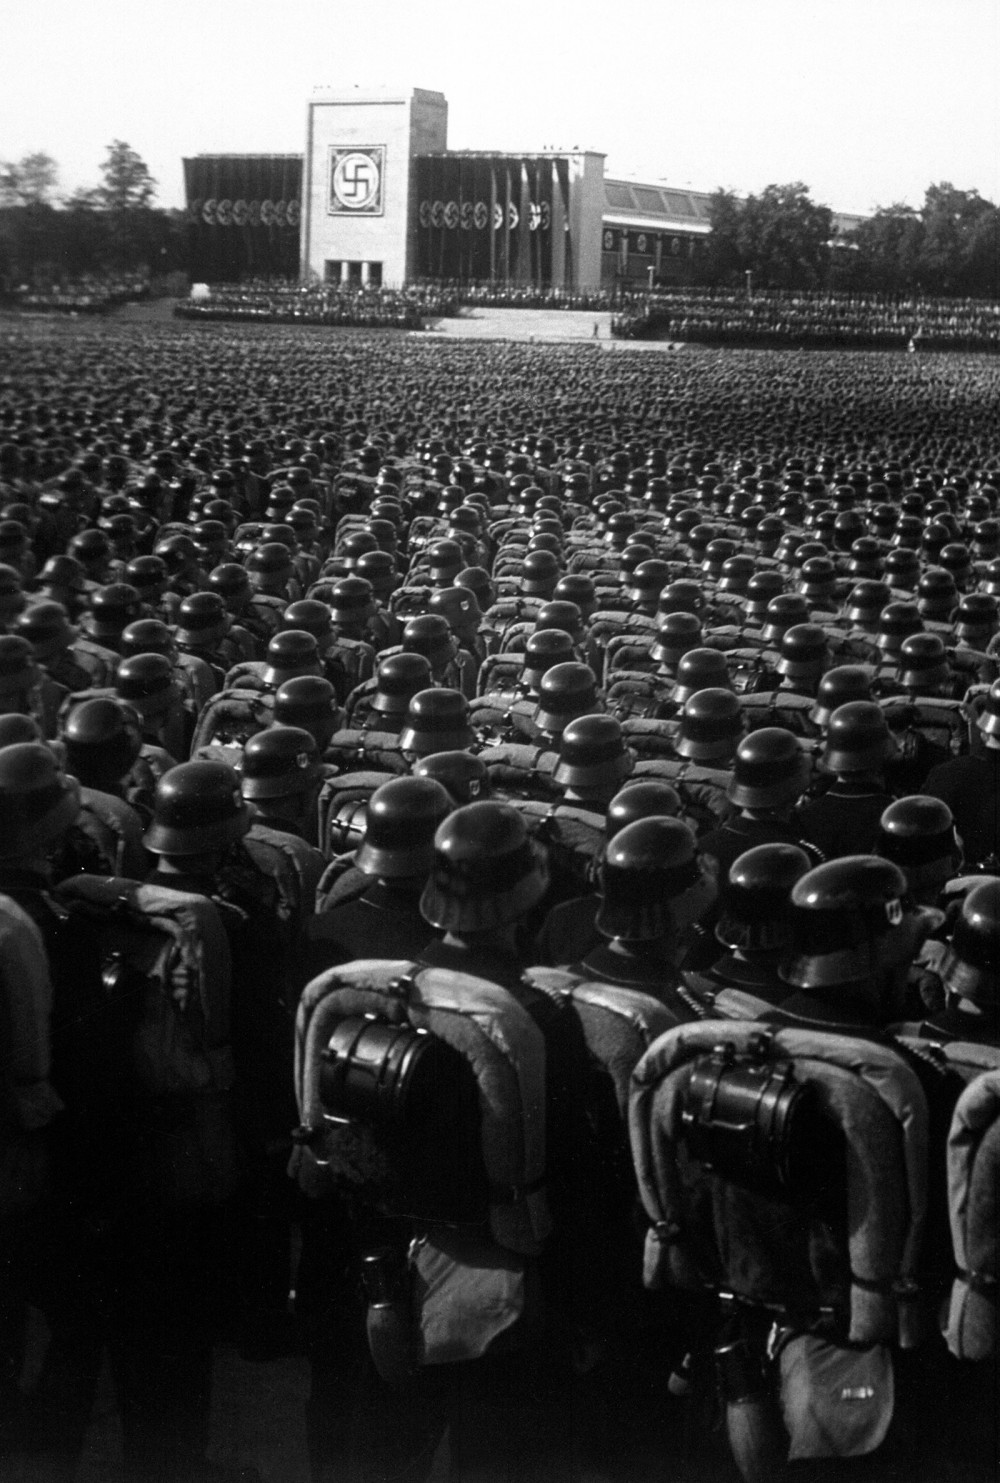 Thousands of soldiers in formation beneath a sign bearing the Nazi symbol.